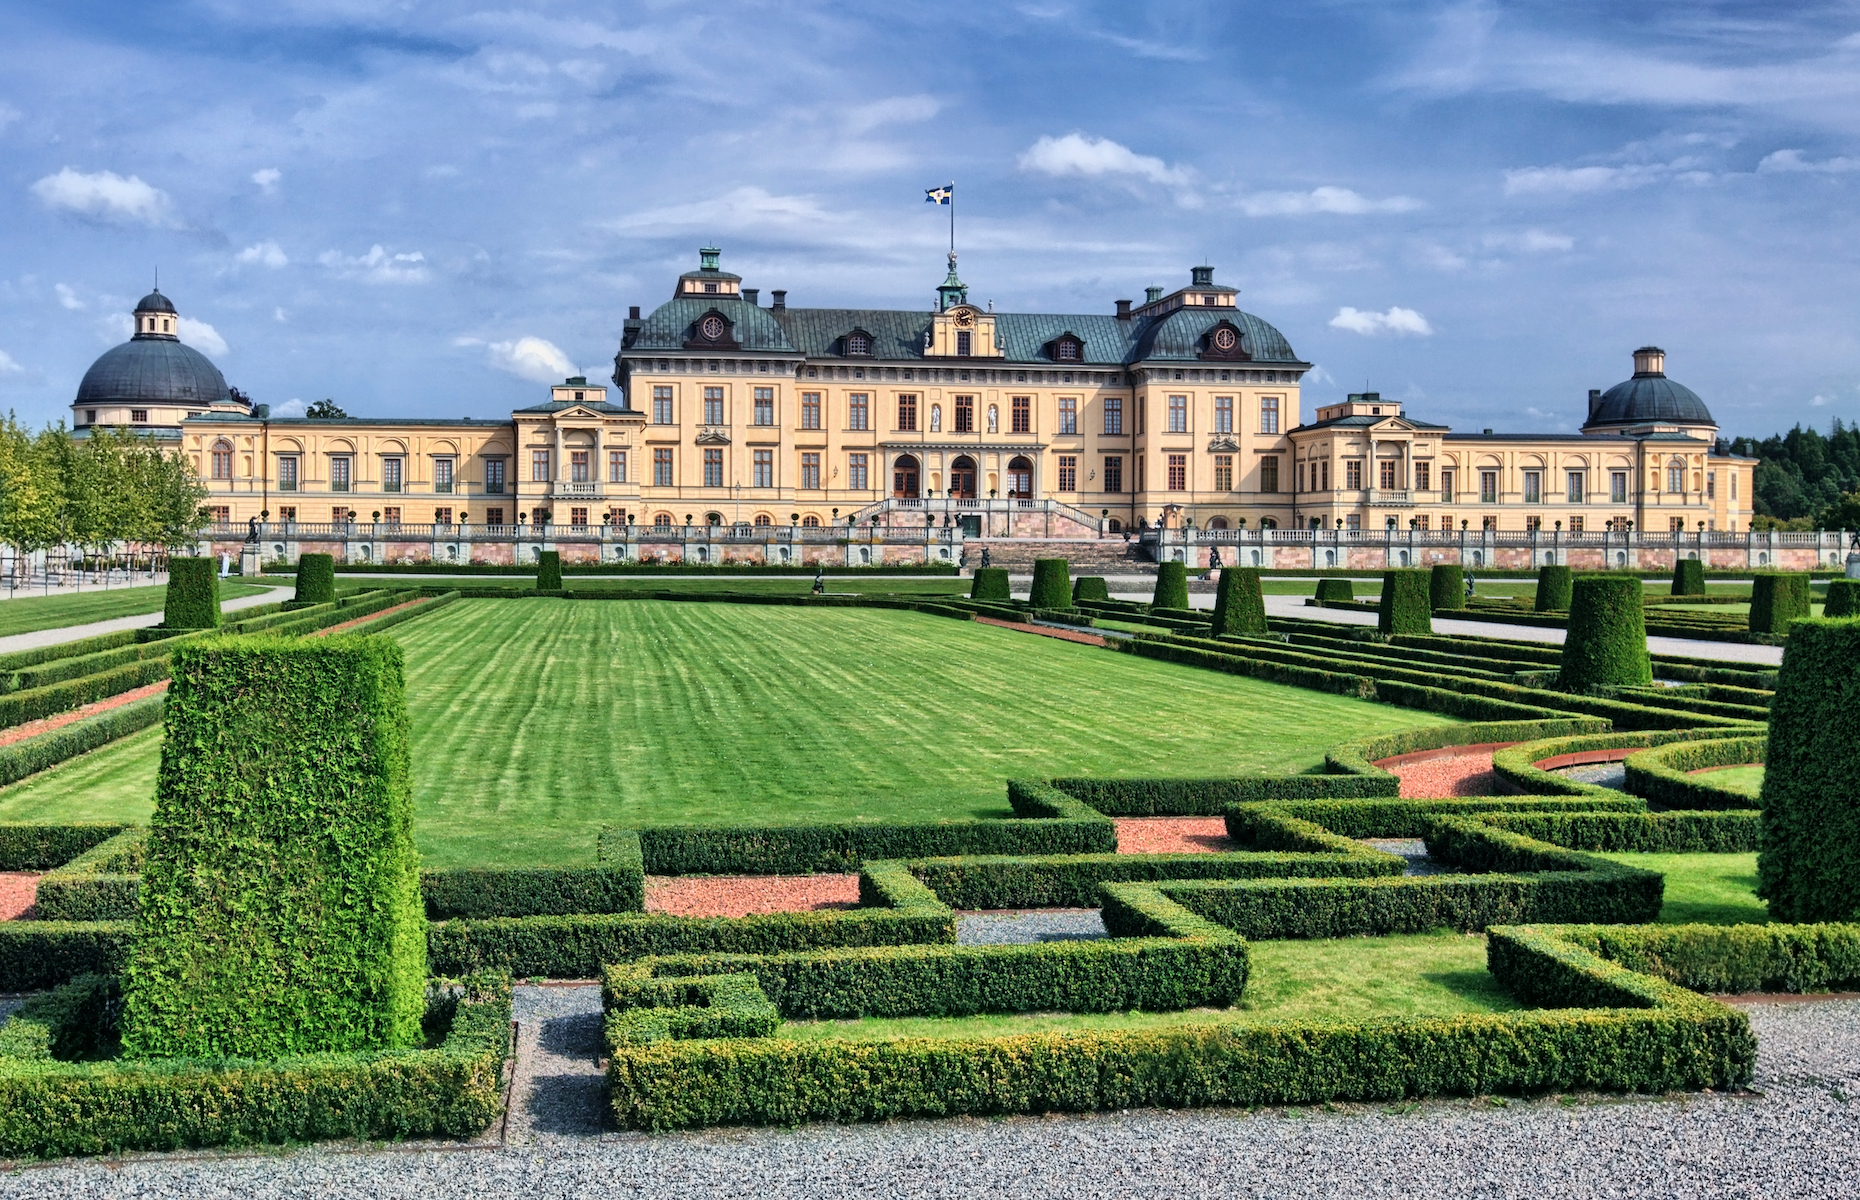 <p>Not only is the Royal Domain of Drottningholm a <a href="https://whc.unesco.org/en/list/559/" rel="noreferrer noopener">UNESCO</a> World Heritage Site, it’s also home to one of the world’s most beautiful castles. The <a href="https://www.kungligaslotten.se/english.html" rel="noreferrer noopener">Royal Domain of Drottningholm</a> is located on the island of Lovön about 10 kilometres from Stockholm. This fairy-tale palace is the official residence of the Swedish royal family. Its <a href="https://visitworldheritage.com/en/eu/drottningholms-slottsteater/12319404-0145-4854-b7e6-a99a7de4de93" rel="noreferrer noopener">theatre</a> is still used for flamboyant summertime performances.</p>